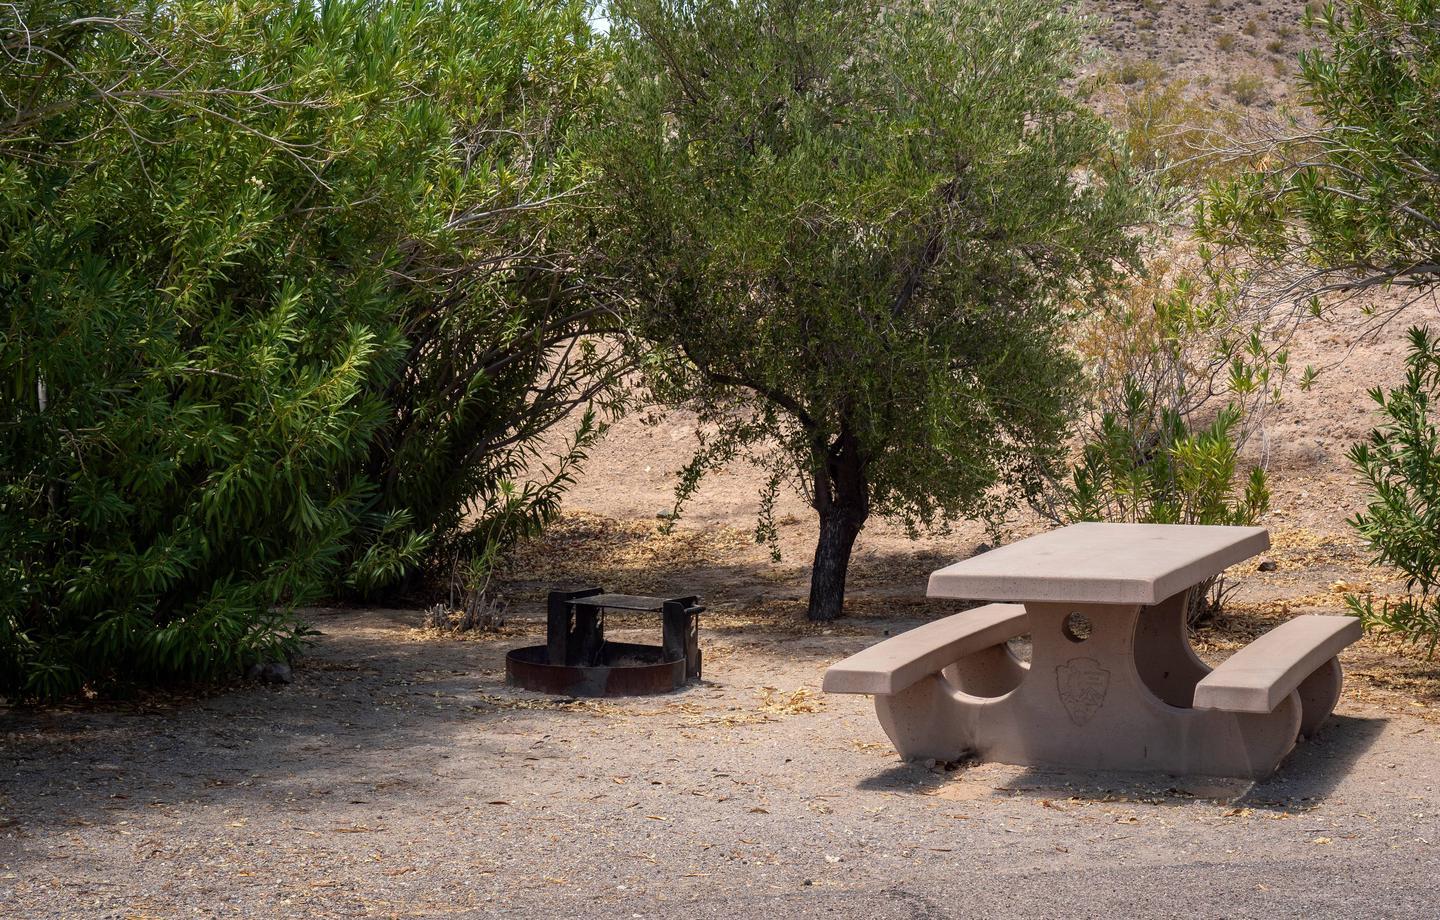 Photo of a picnic table and fire ring in a cleared area for tent camping with trees.